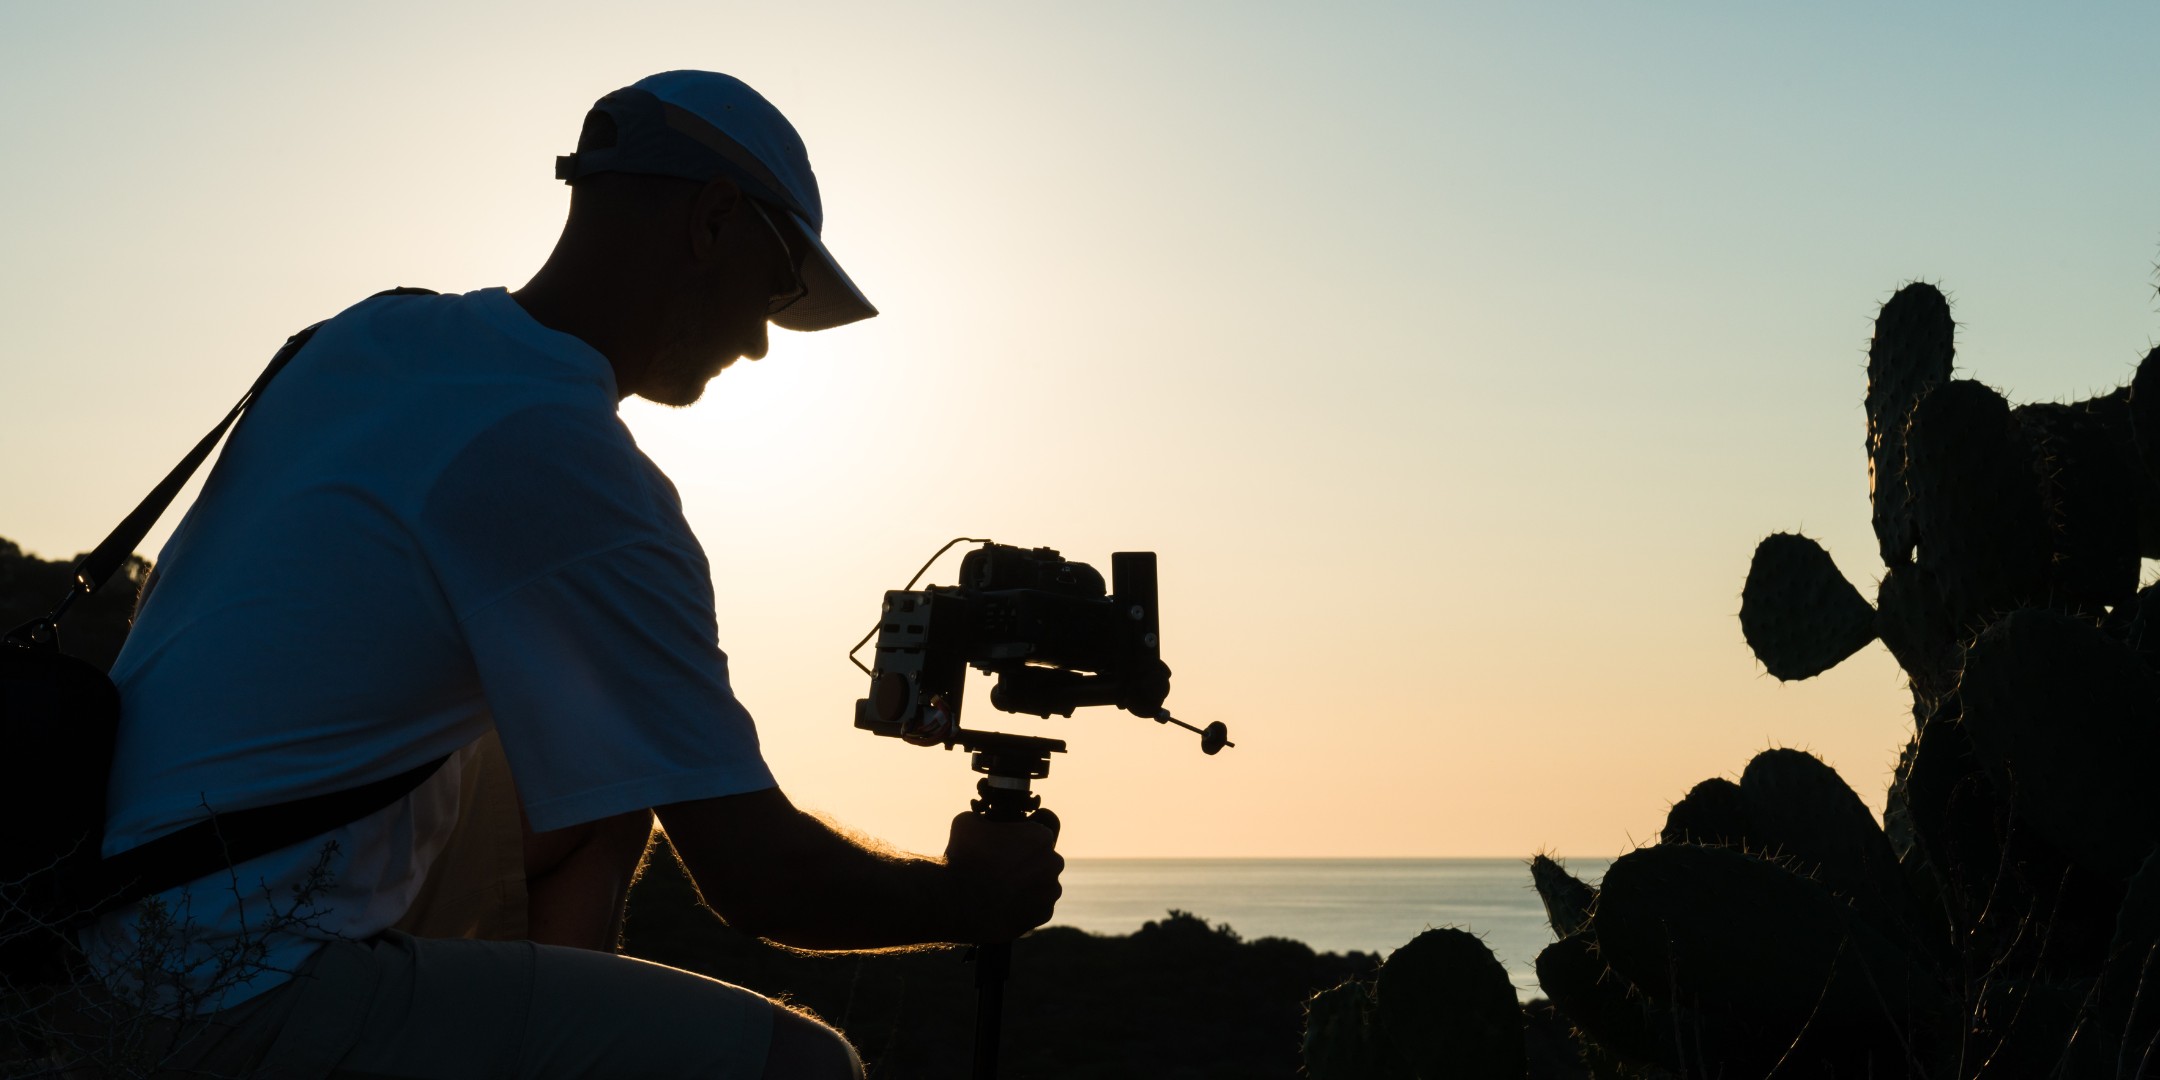 Man filming at dawn with camera on rig